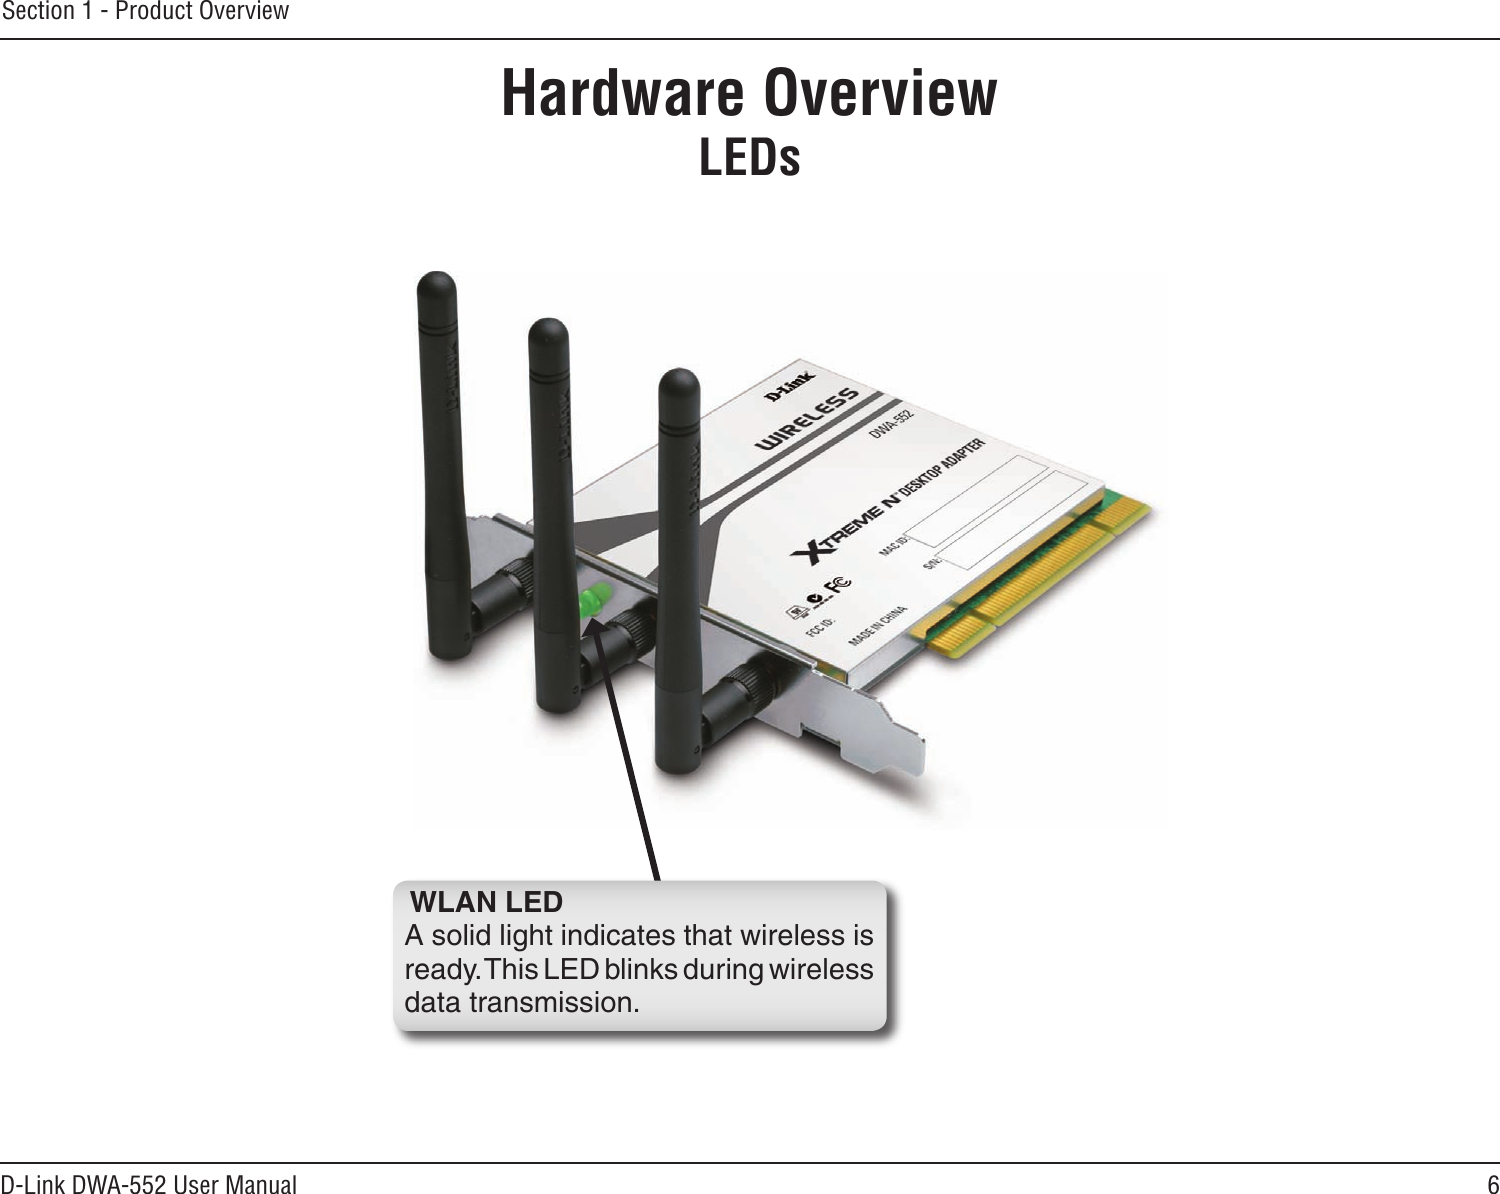 6D-Link DWA-552 User ManualSection 1 - Product OverviewHardware OverviewLEDsWLAN LEDA solid light indicates that wireless is ready. This LED blinks during wireless data transmission.